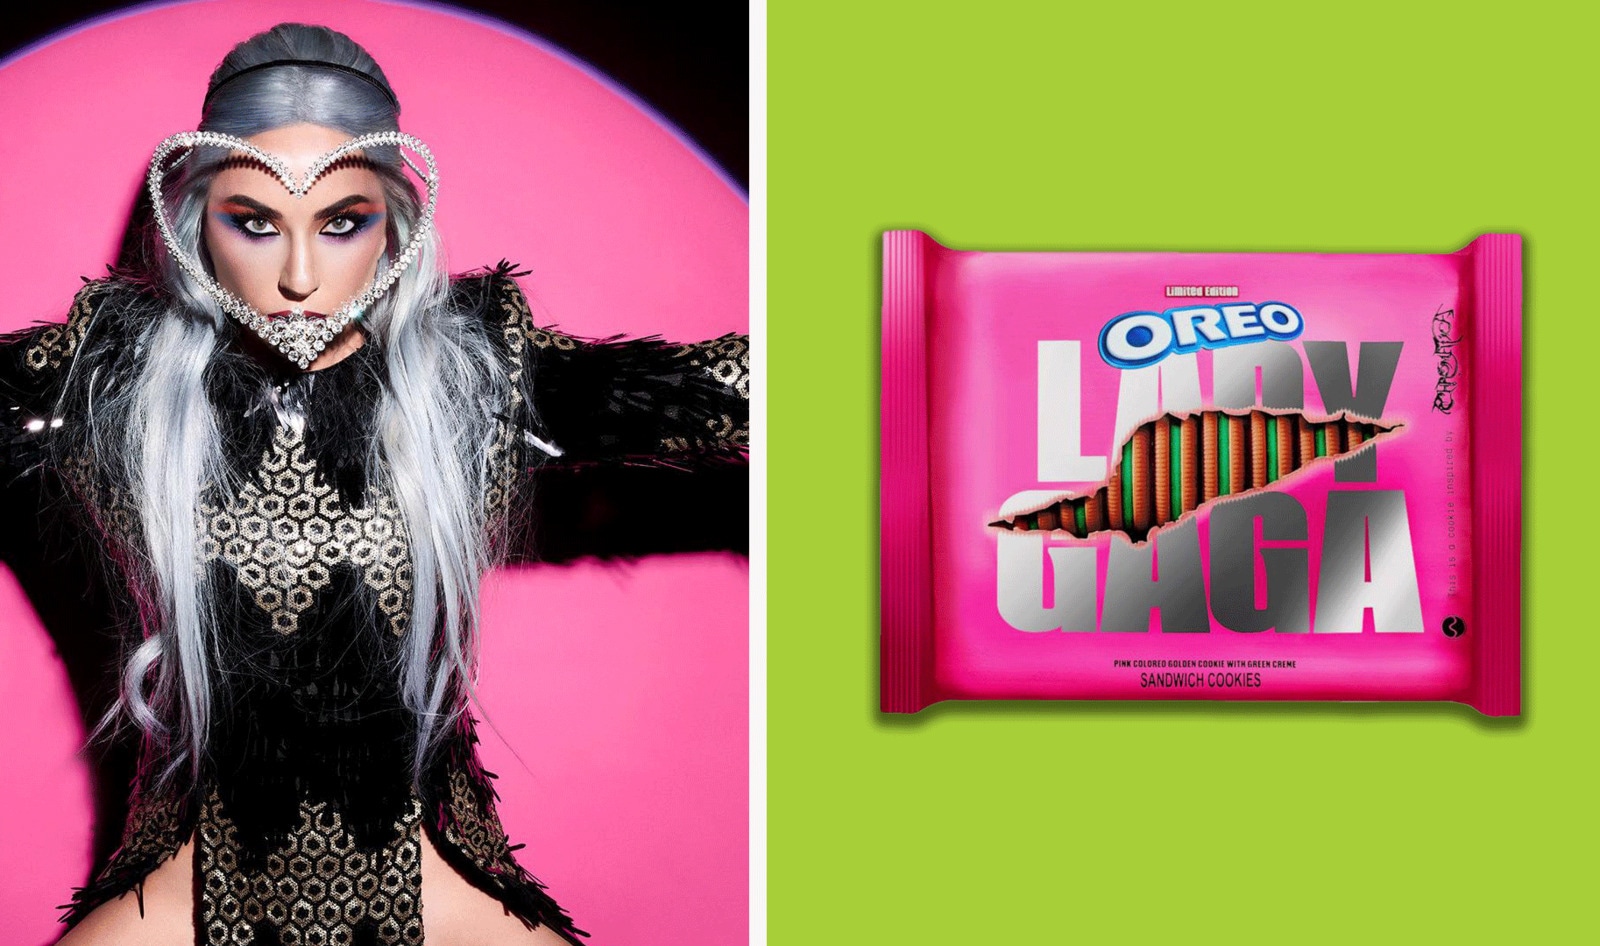 Oreo to Launch Lady Gaga-Inspired Cookies